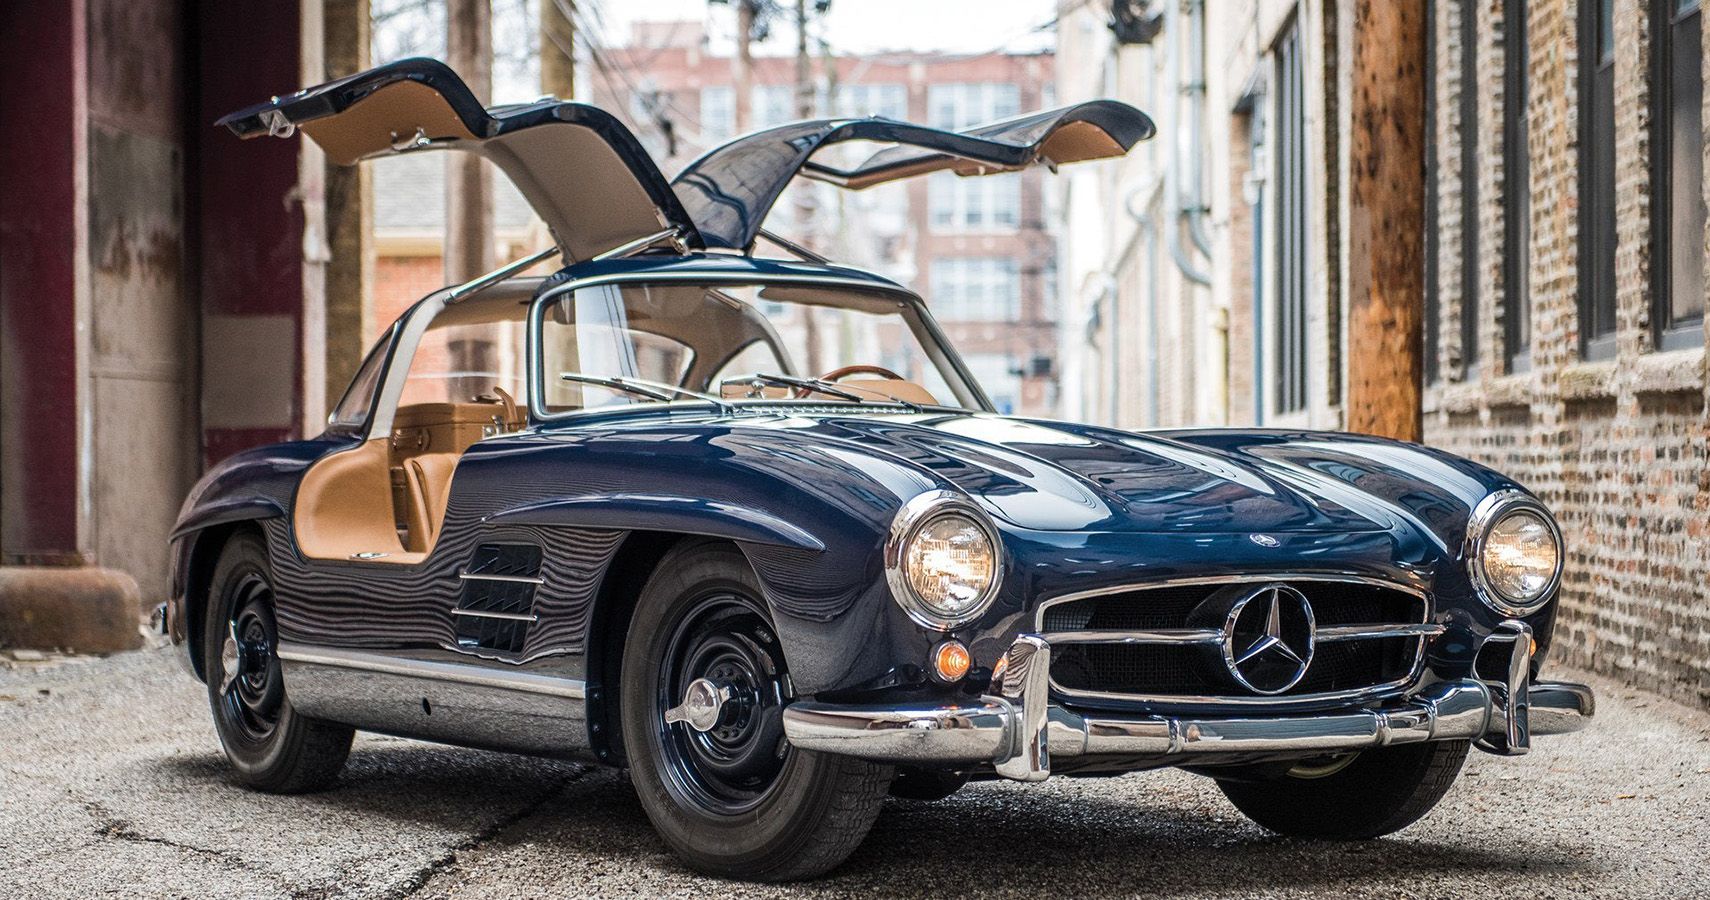 Before The SLS AMG, Which Is The First Car That AMG Built Completely From Scratch, There Was The Mercedes Benz 300SL, Often Referred To As The 300SL Gullwing Because Of Those Iconic Gullwing Doors